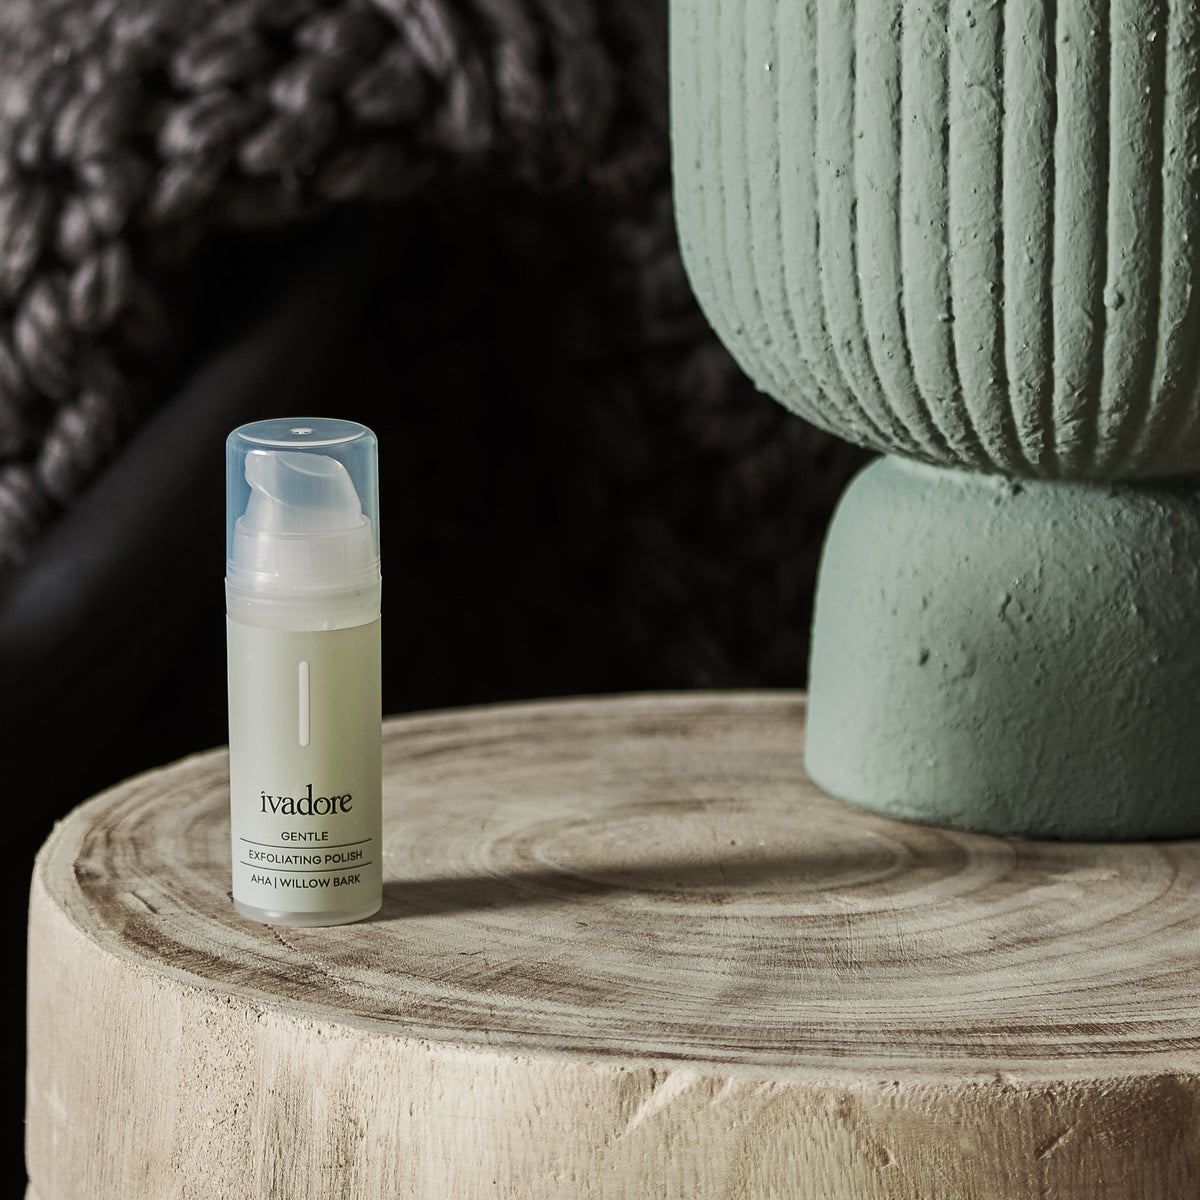 Gentle Exfoliating Polish in packaging on wooden table with styled ceramic vase